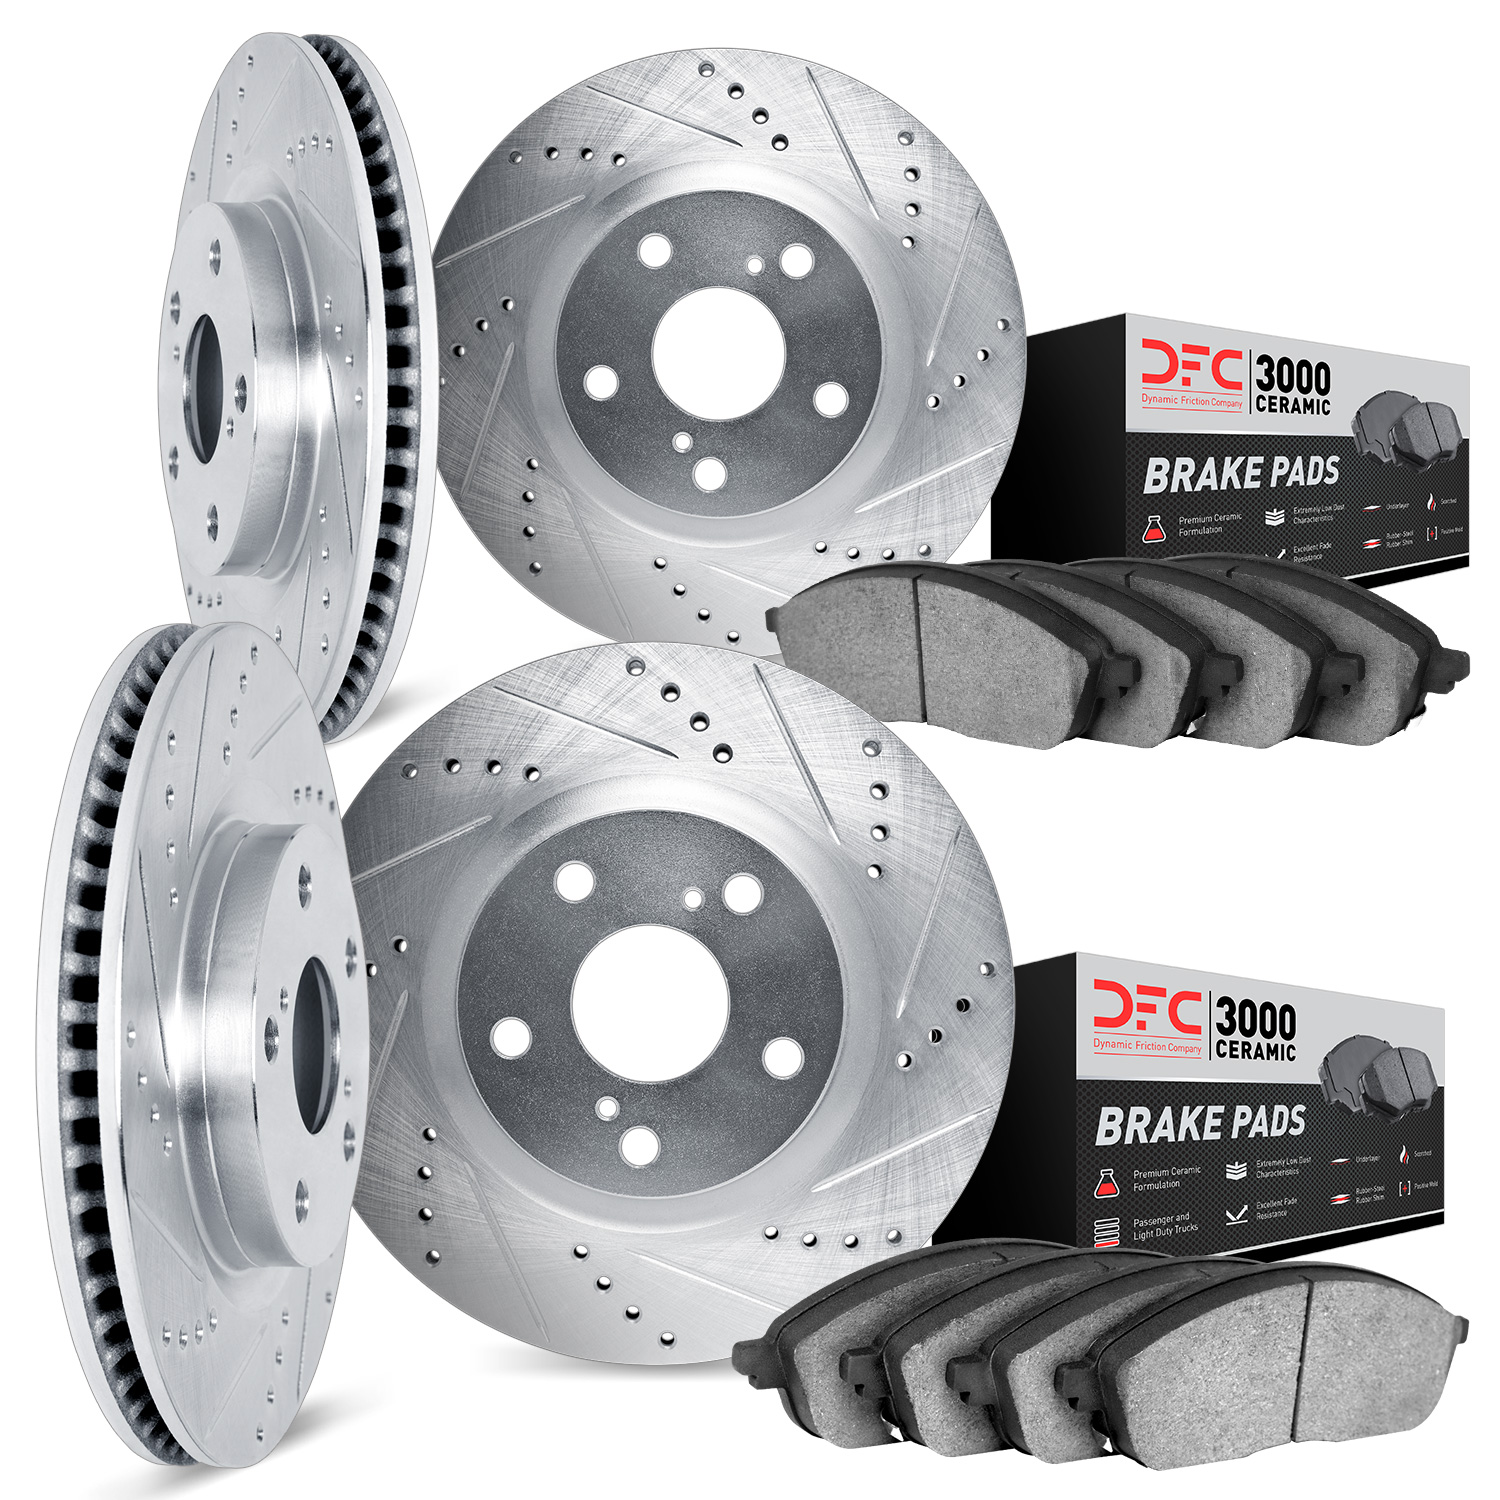 7304-75005 Drilled/Slotted Brake Rotor with 3000-Series Ceramic Brake Pads Kit [Silver], 1993-1994 Lexus/Toyota/Scion, Position: